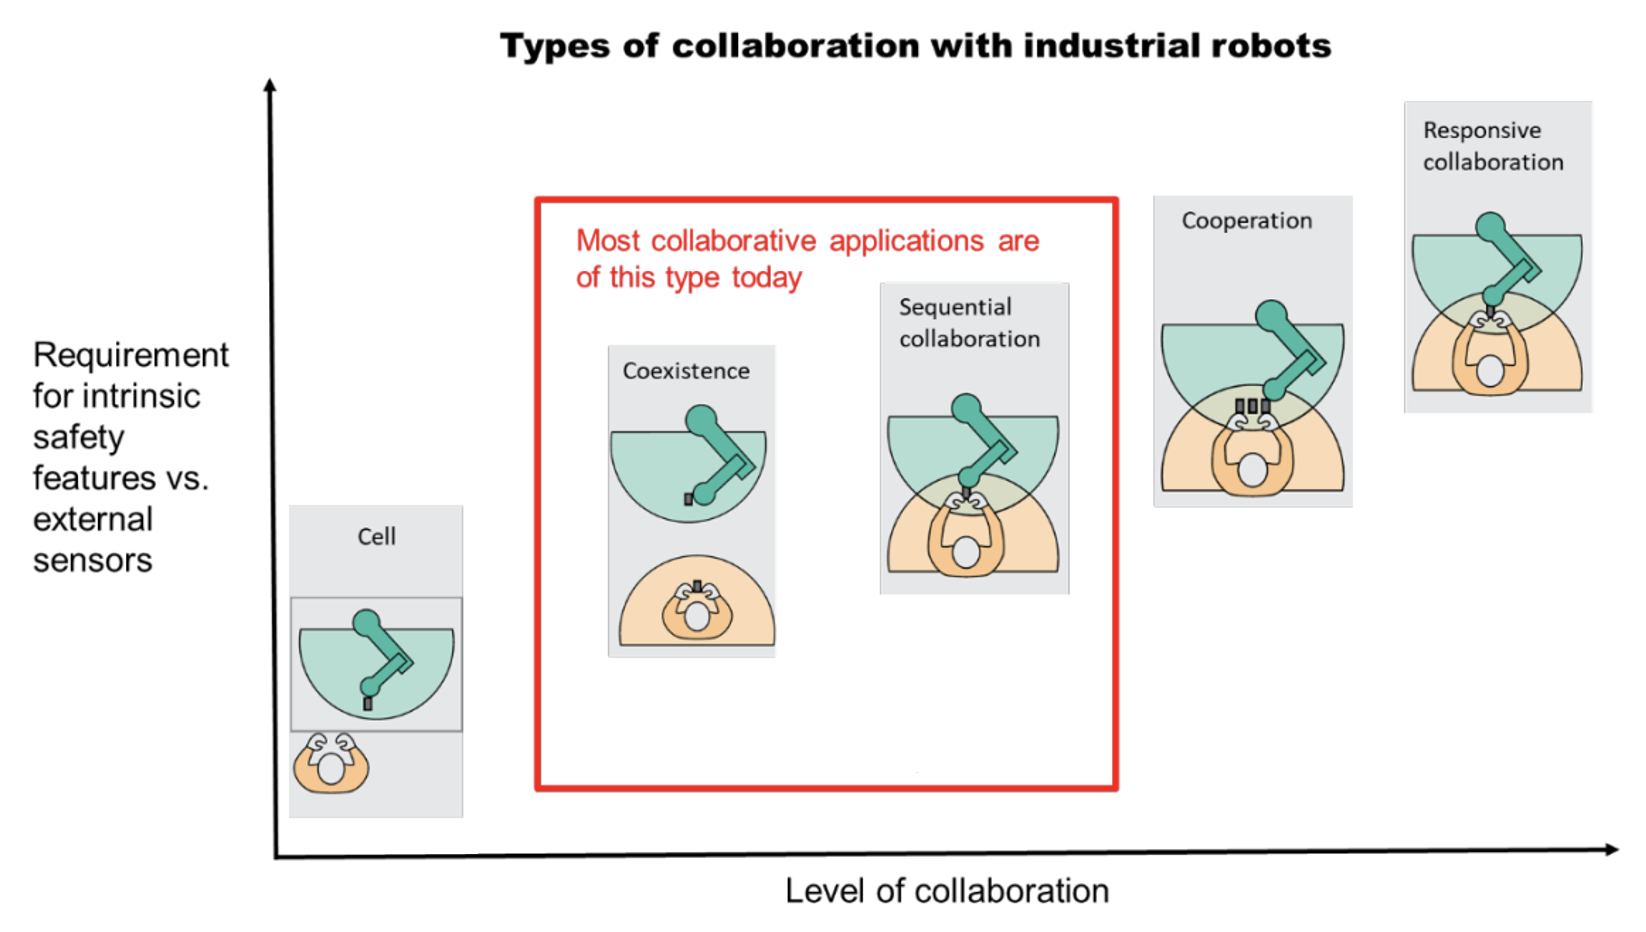 Types of Collaboration